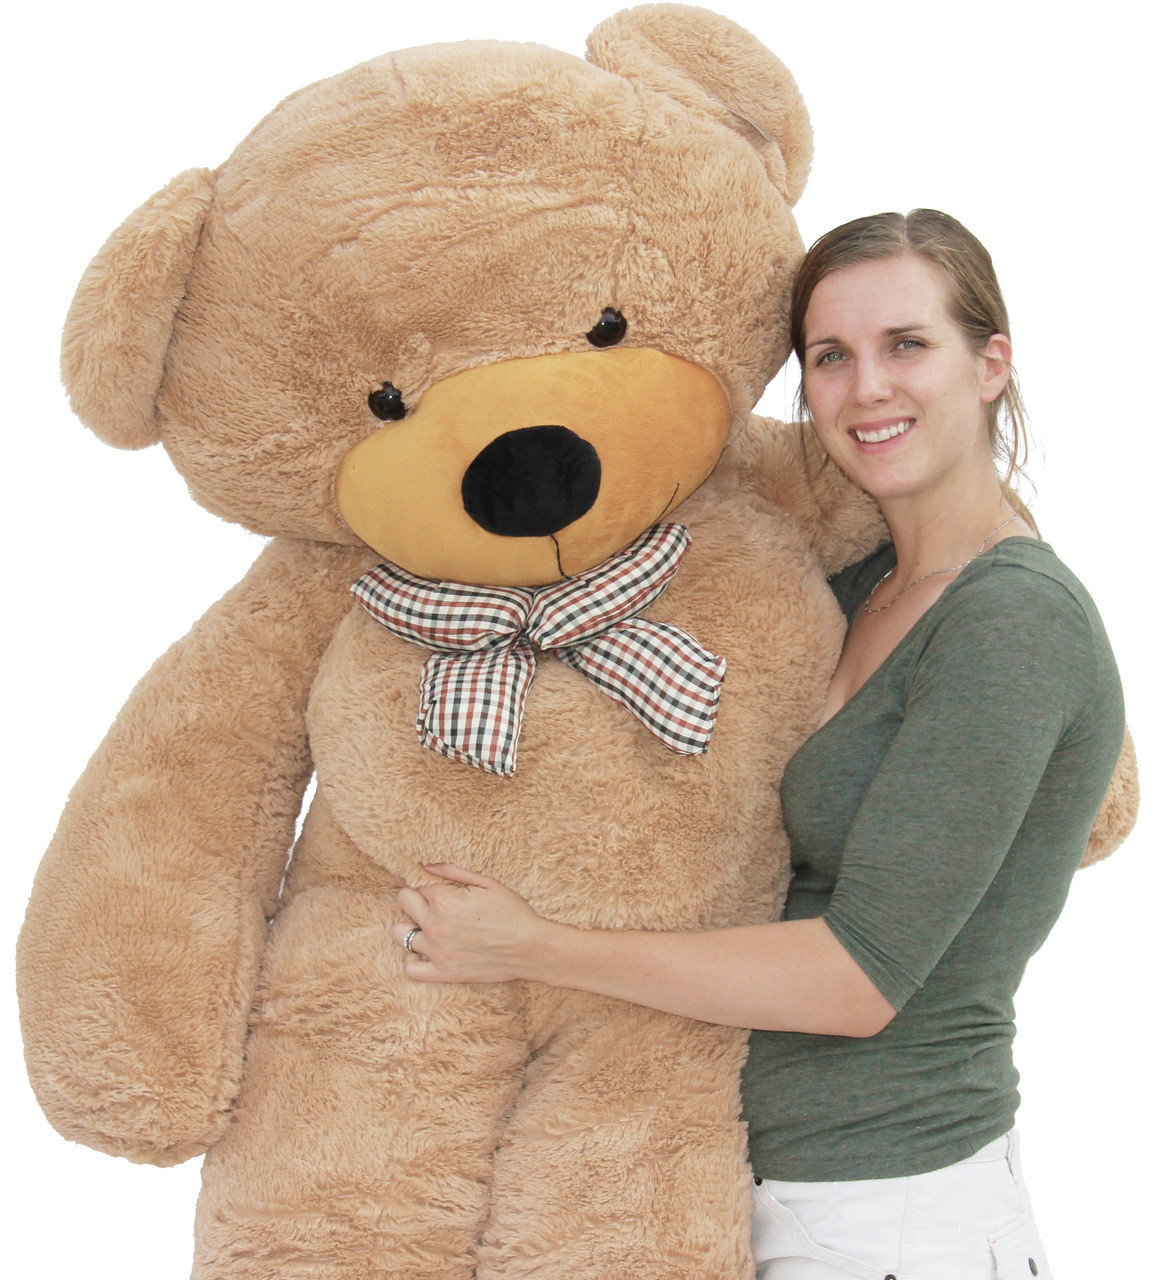 stores that sell big teddy bears